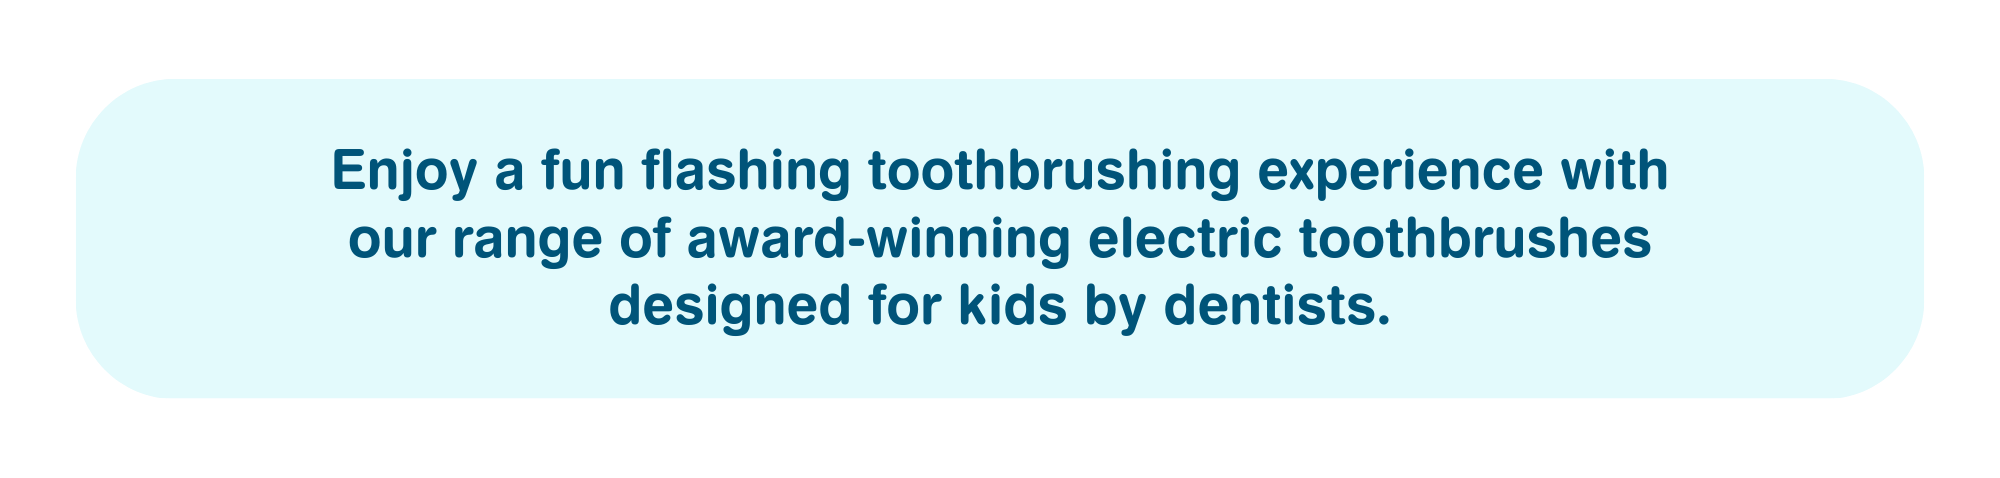 best Kids electric toothbrush - automatic with toothbrush timer